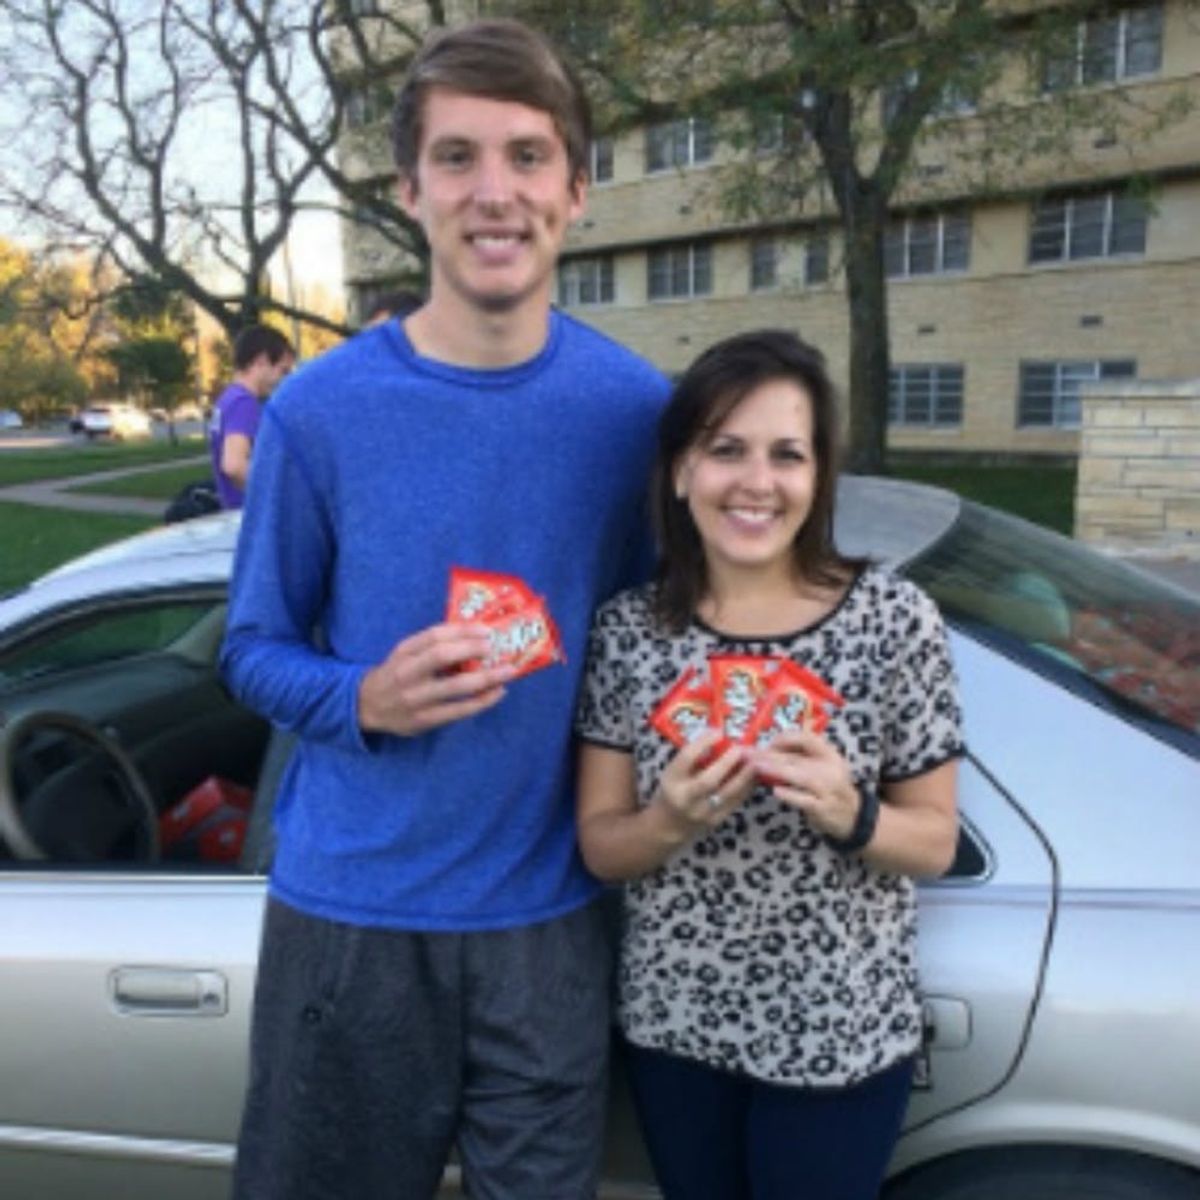 Here’s Why Kit Kat Gave This Student 6,500 Candy Bars